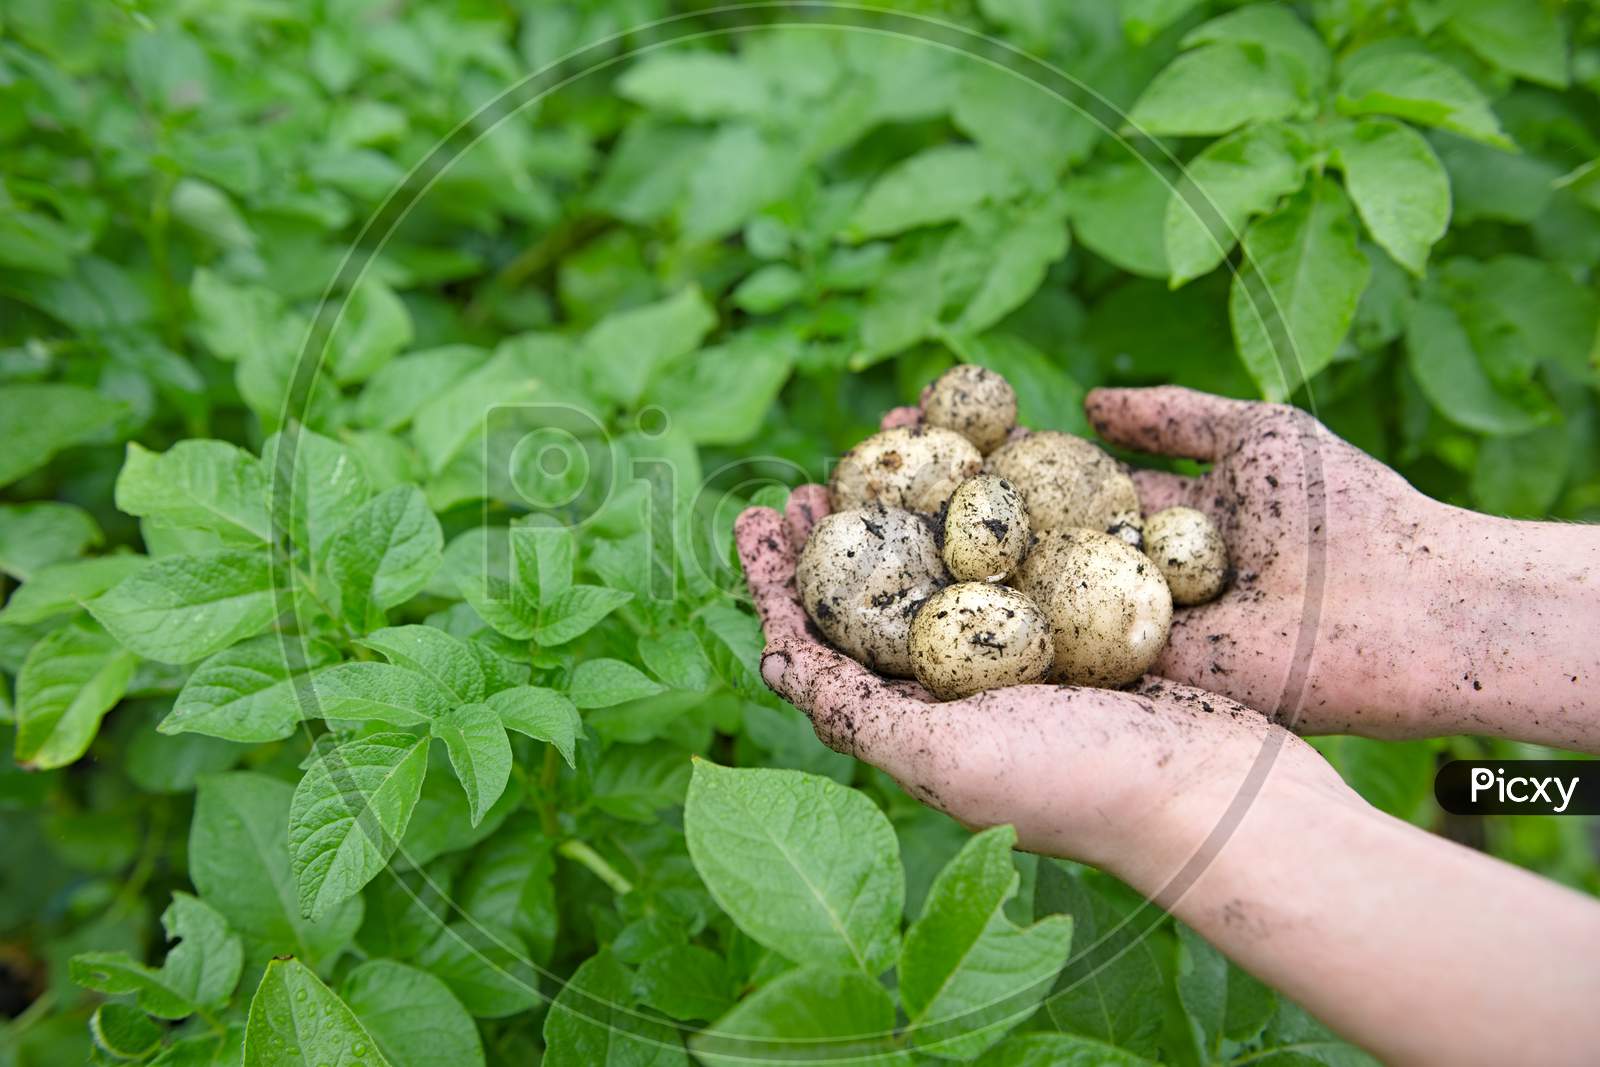 Wider Angle Image Of Home Grown Potatoes Freshly Picked